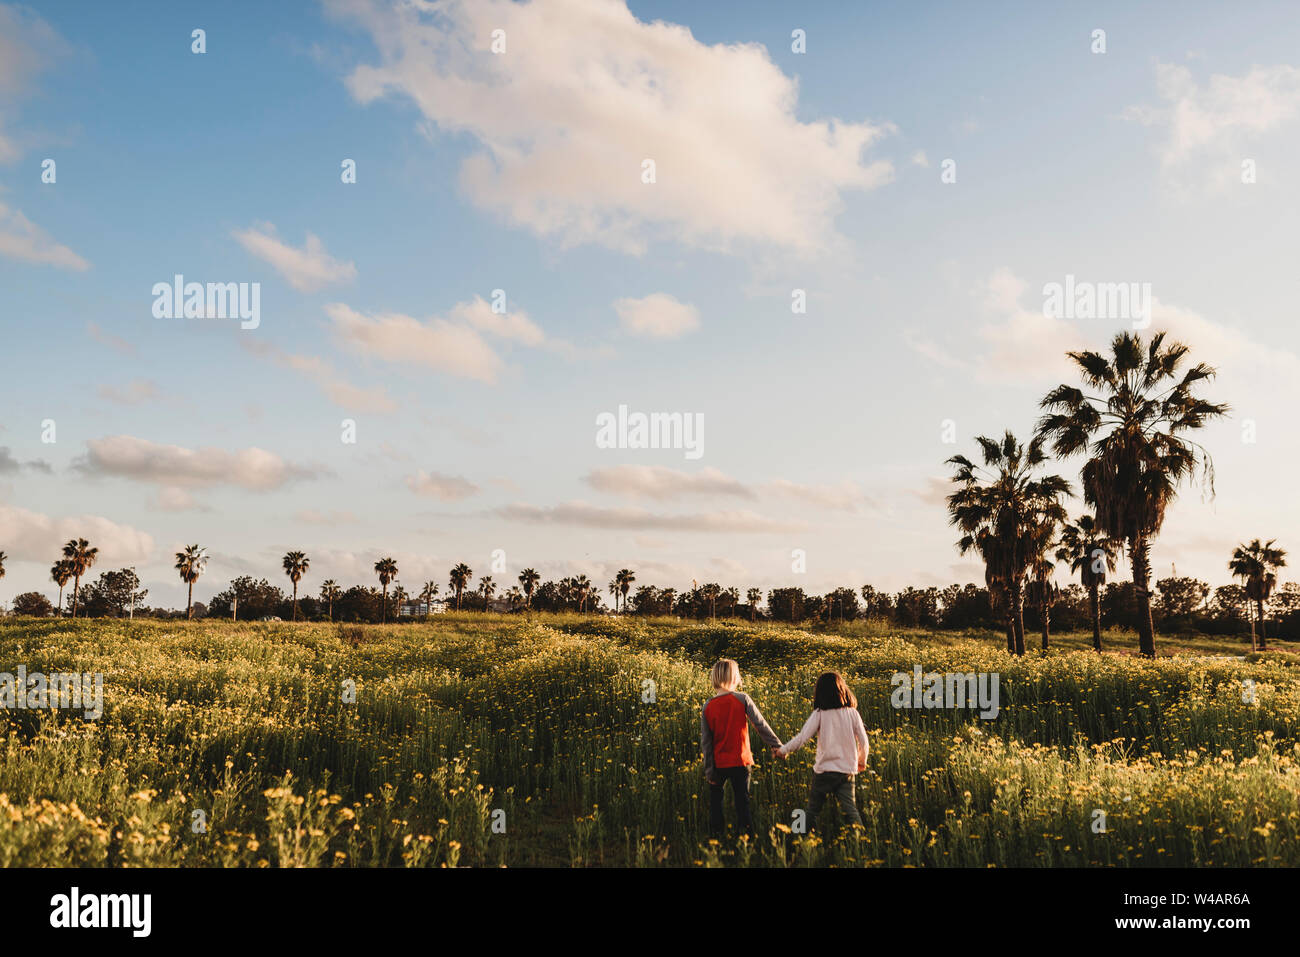 Landscape view of little girl and boy holding hands walking Stock Photo